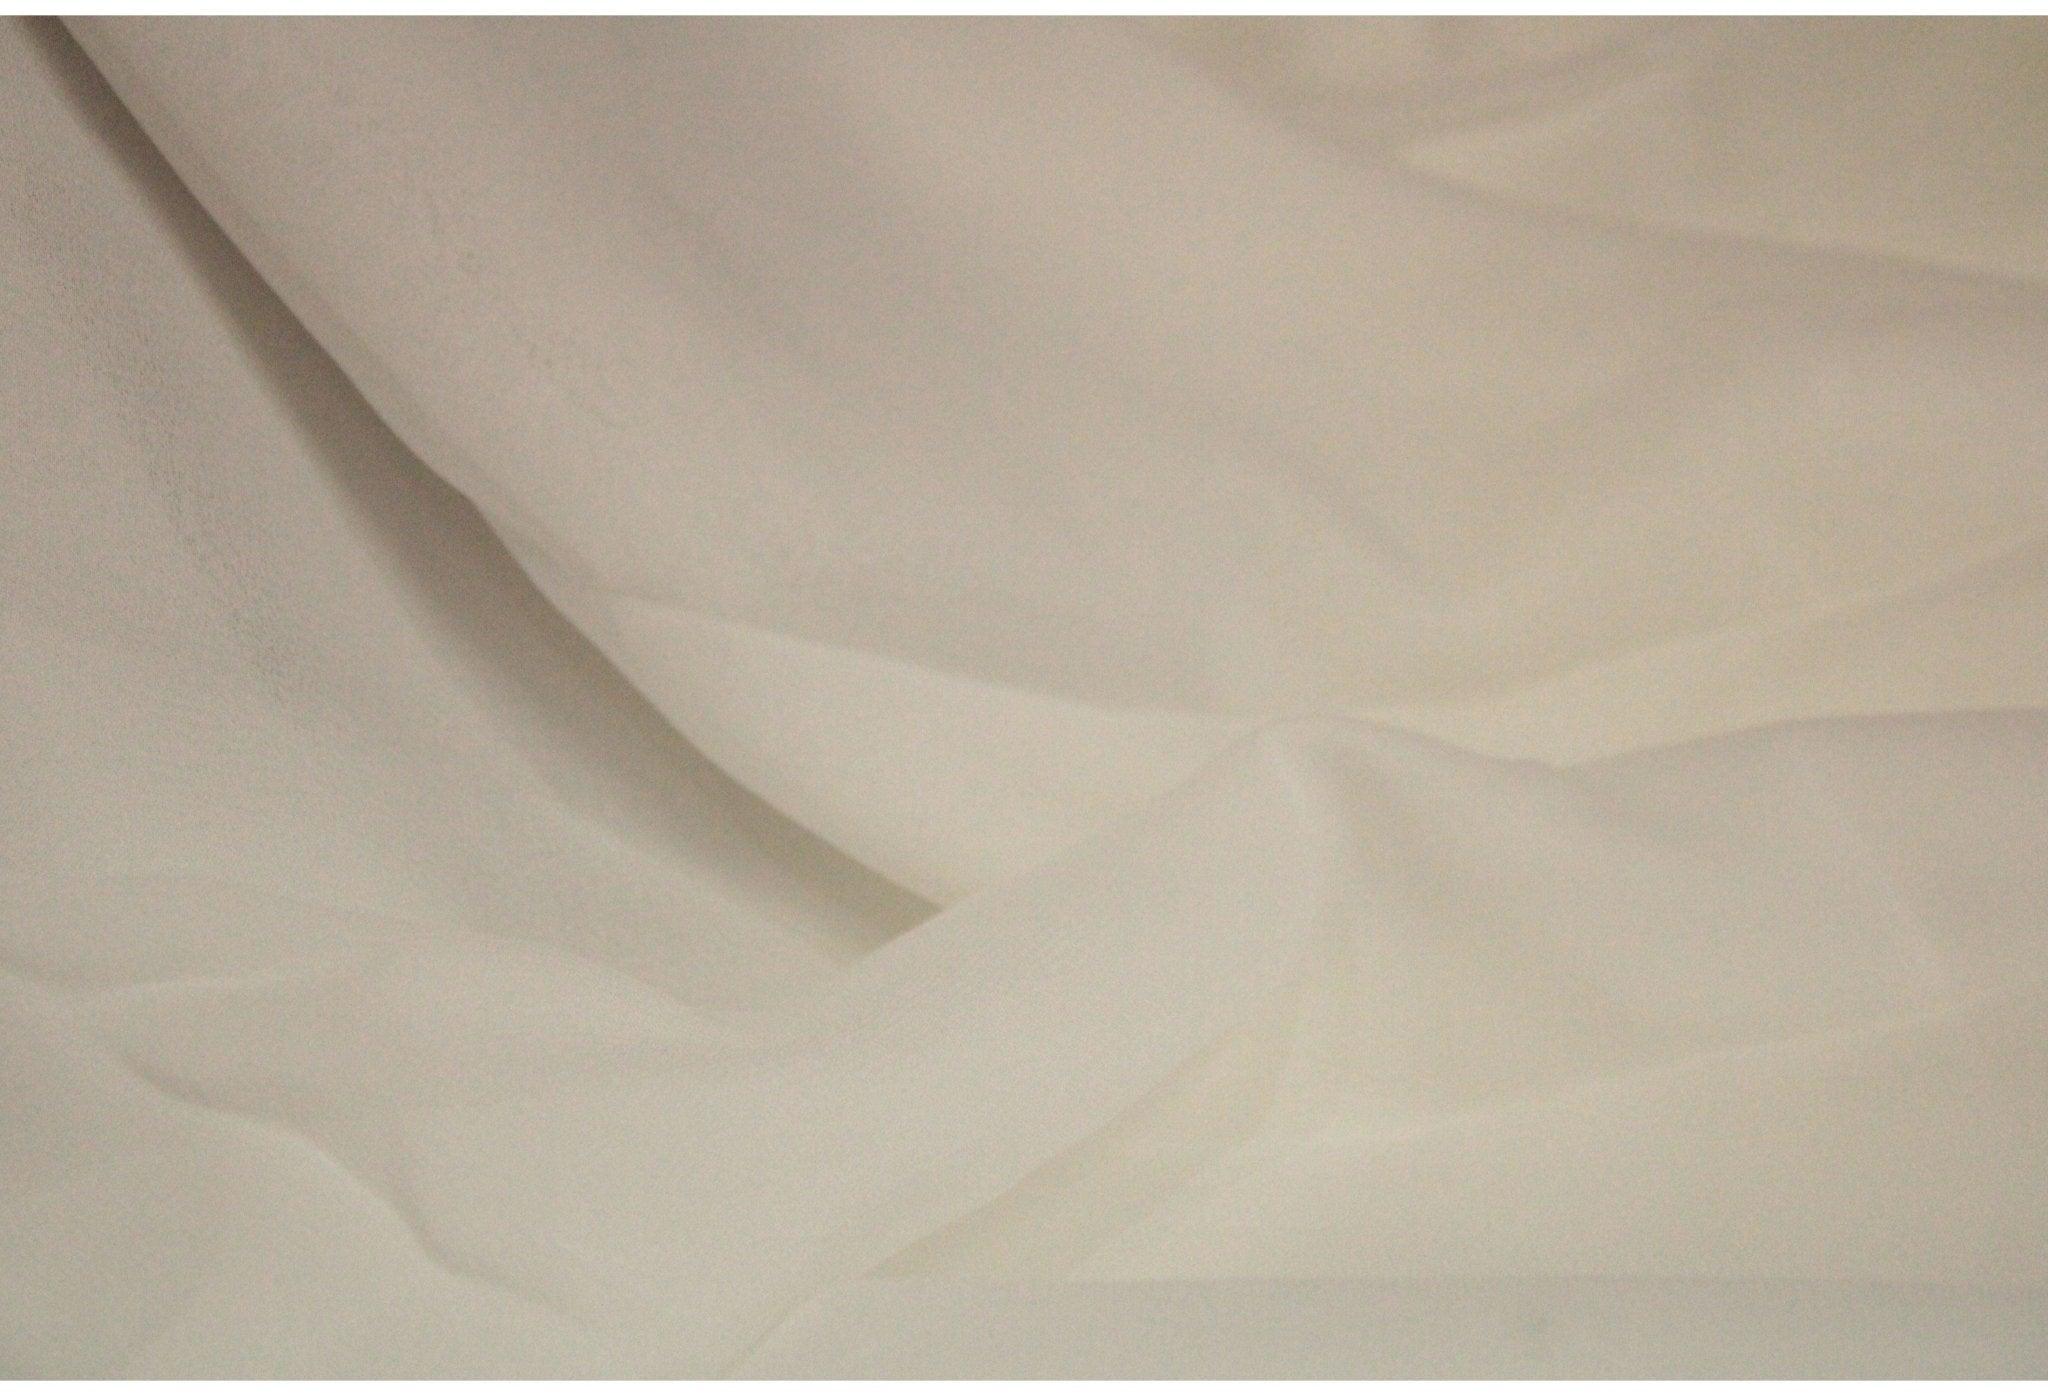 Dyeable Pure Bemberg Georgette Fabric - M'Foks